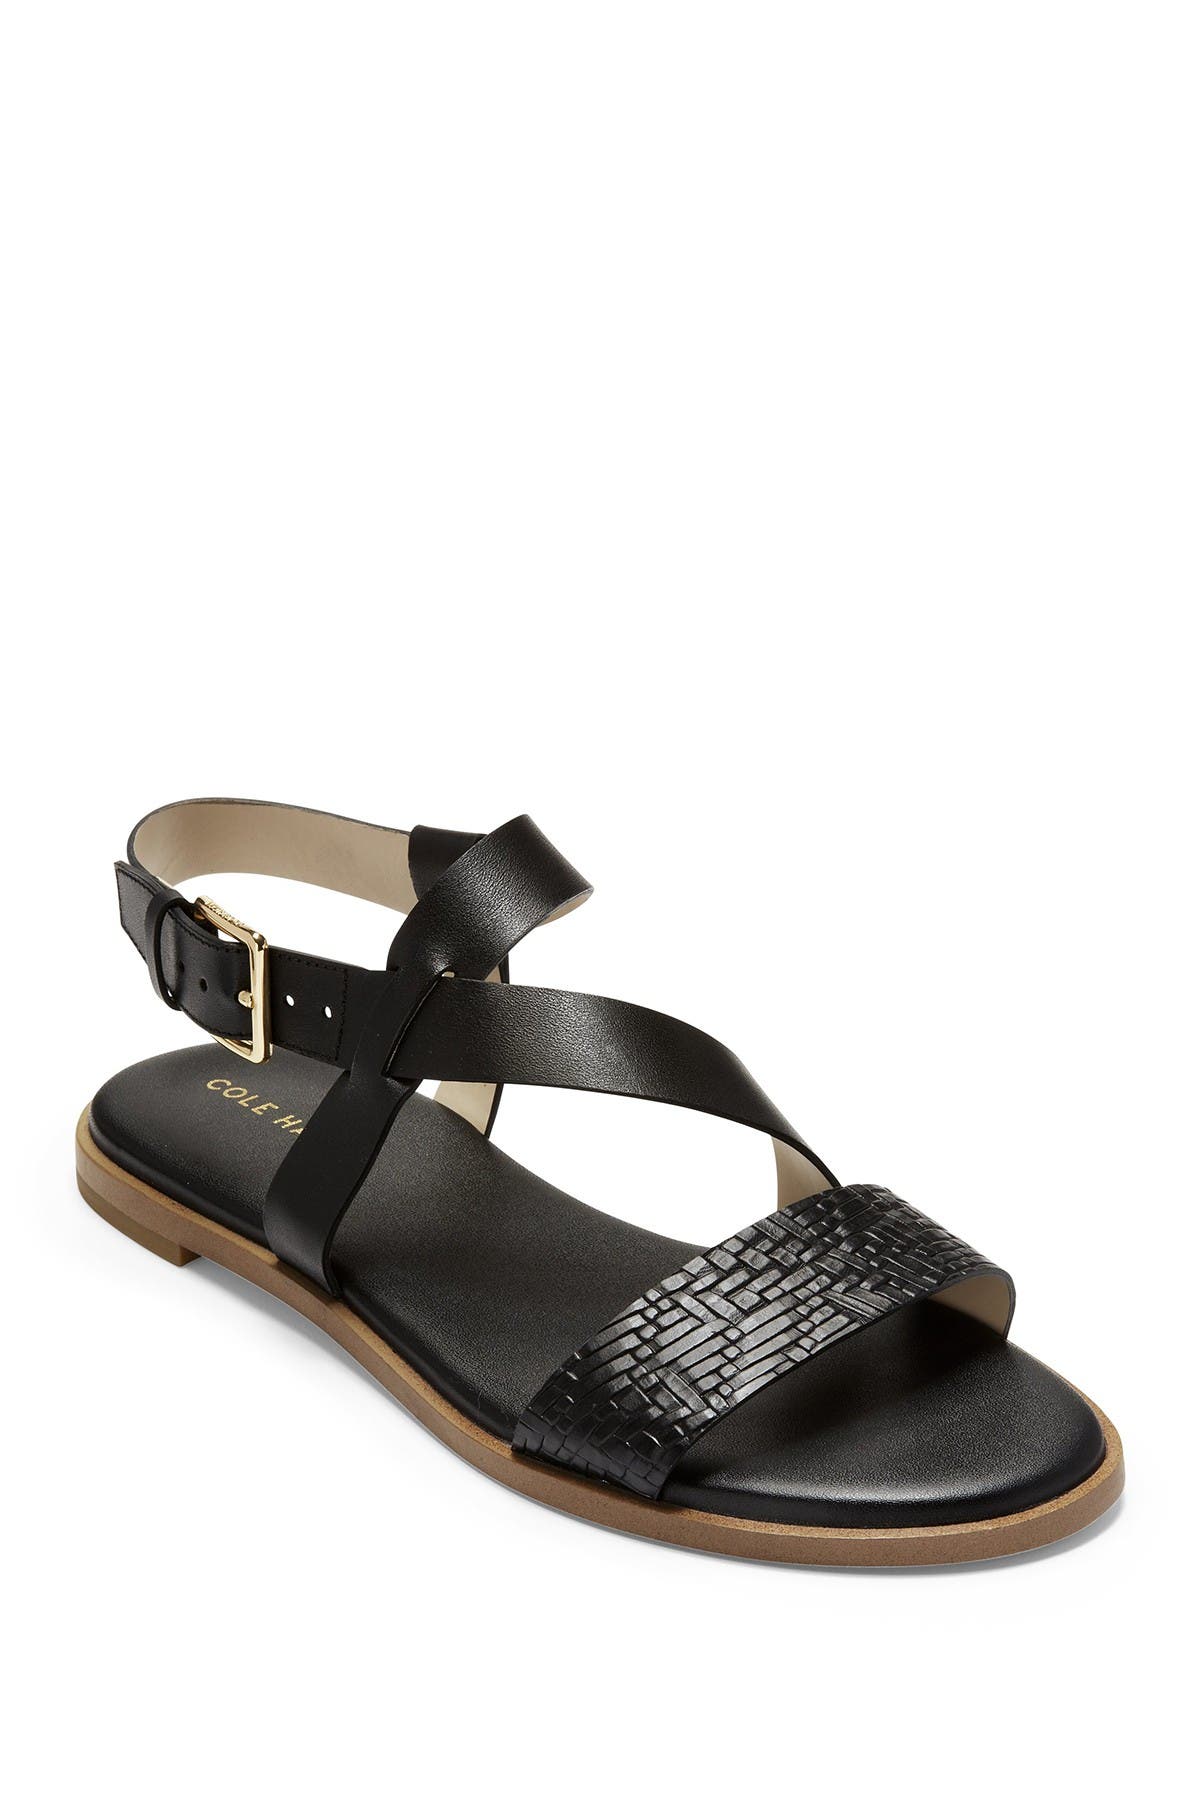 findra sandal cole haan